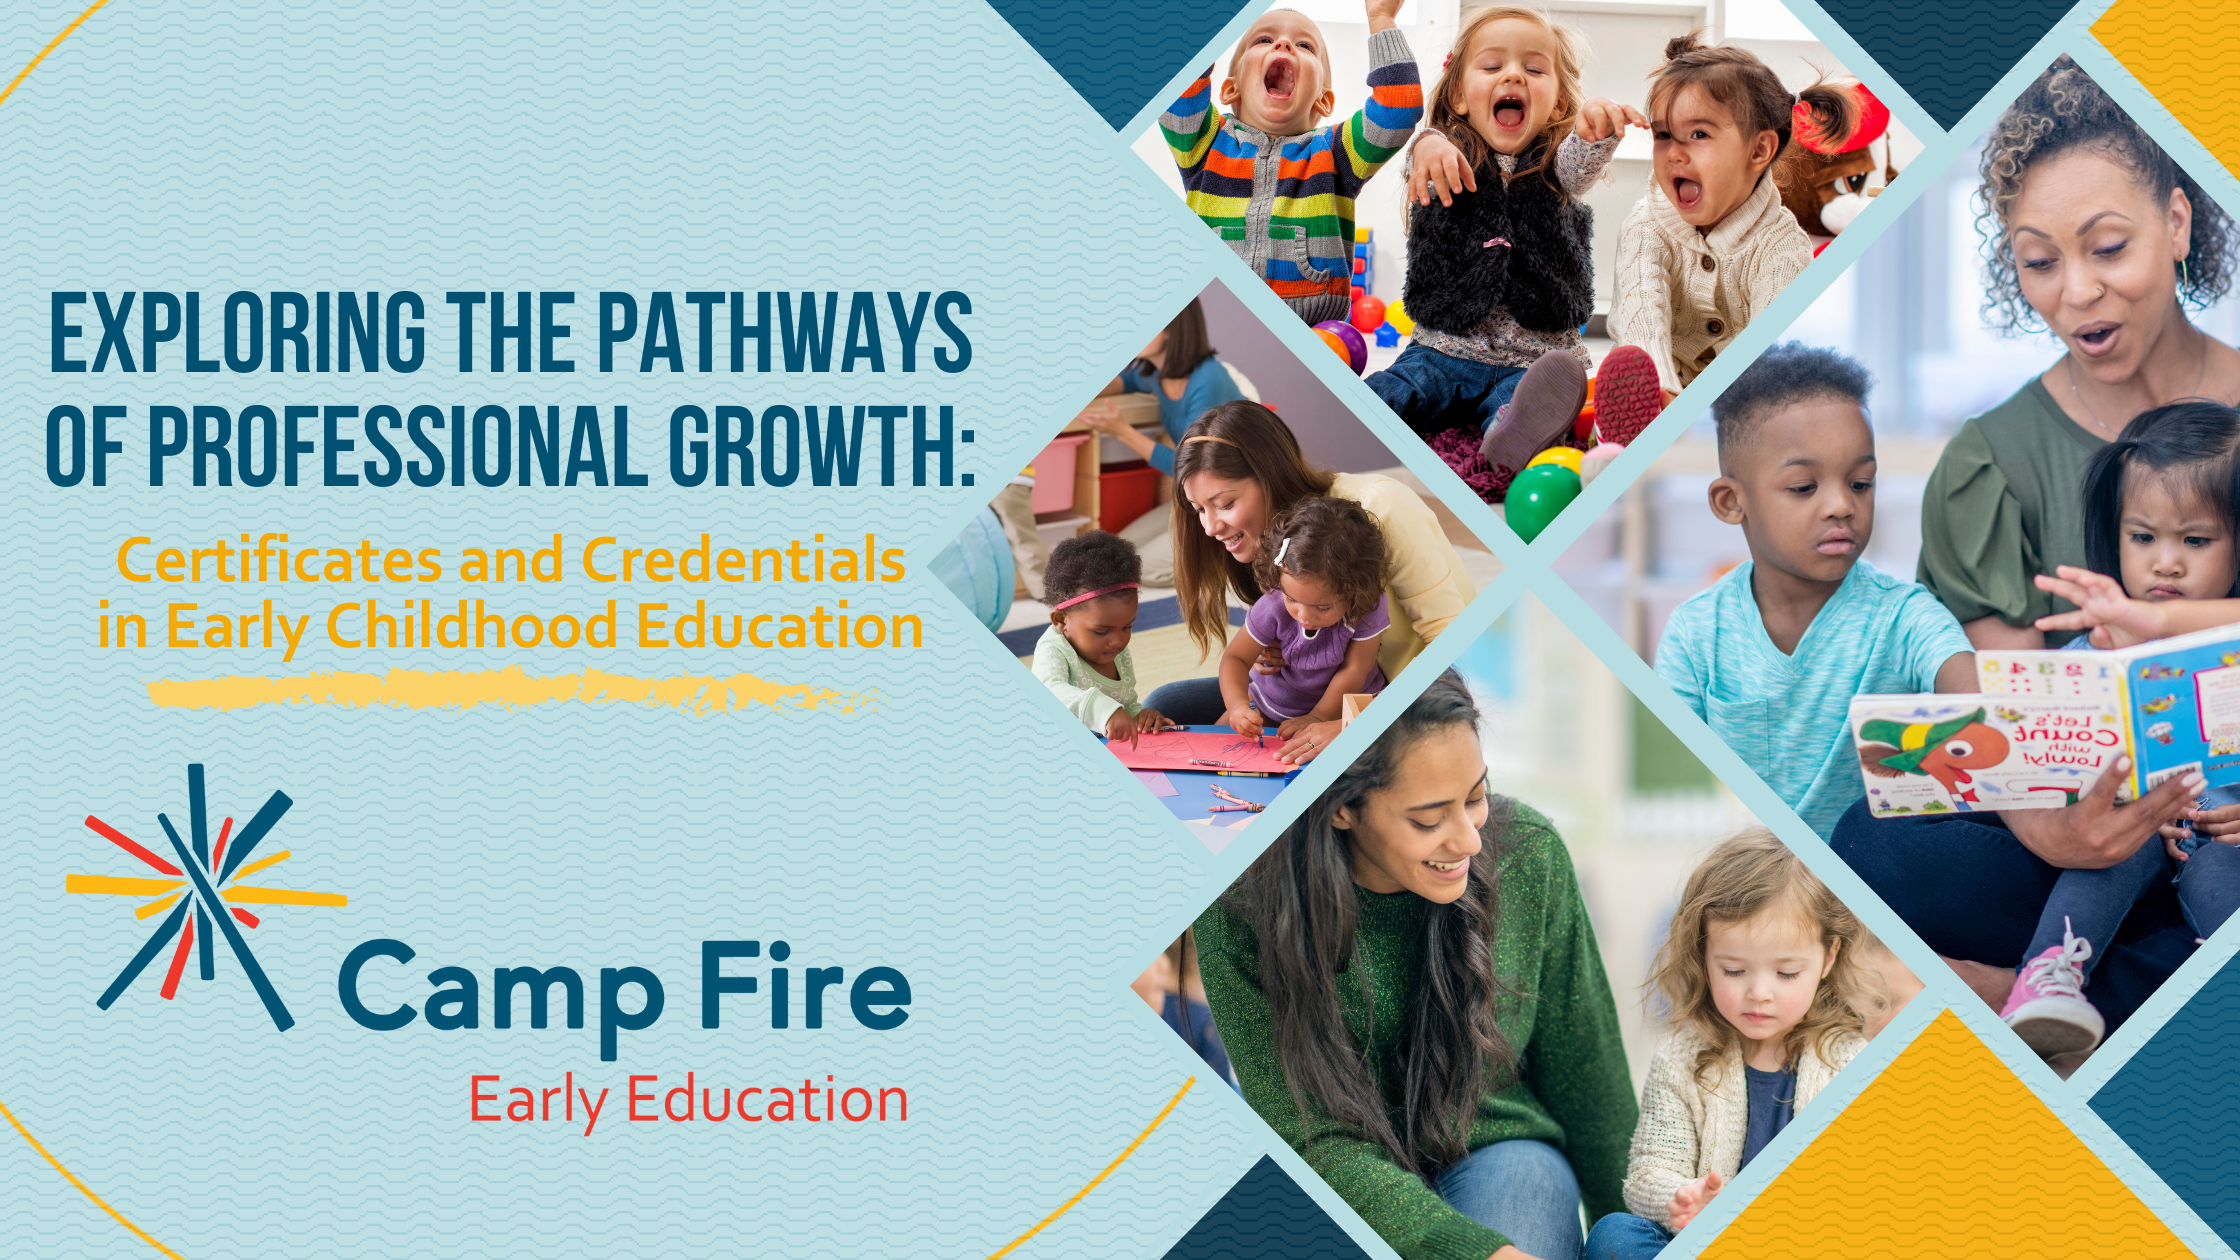 New Community Resource Services Offers Thoughtful Help for Camp Fire Early Education Participants, a Camp Fire First Texas blog